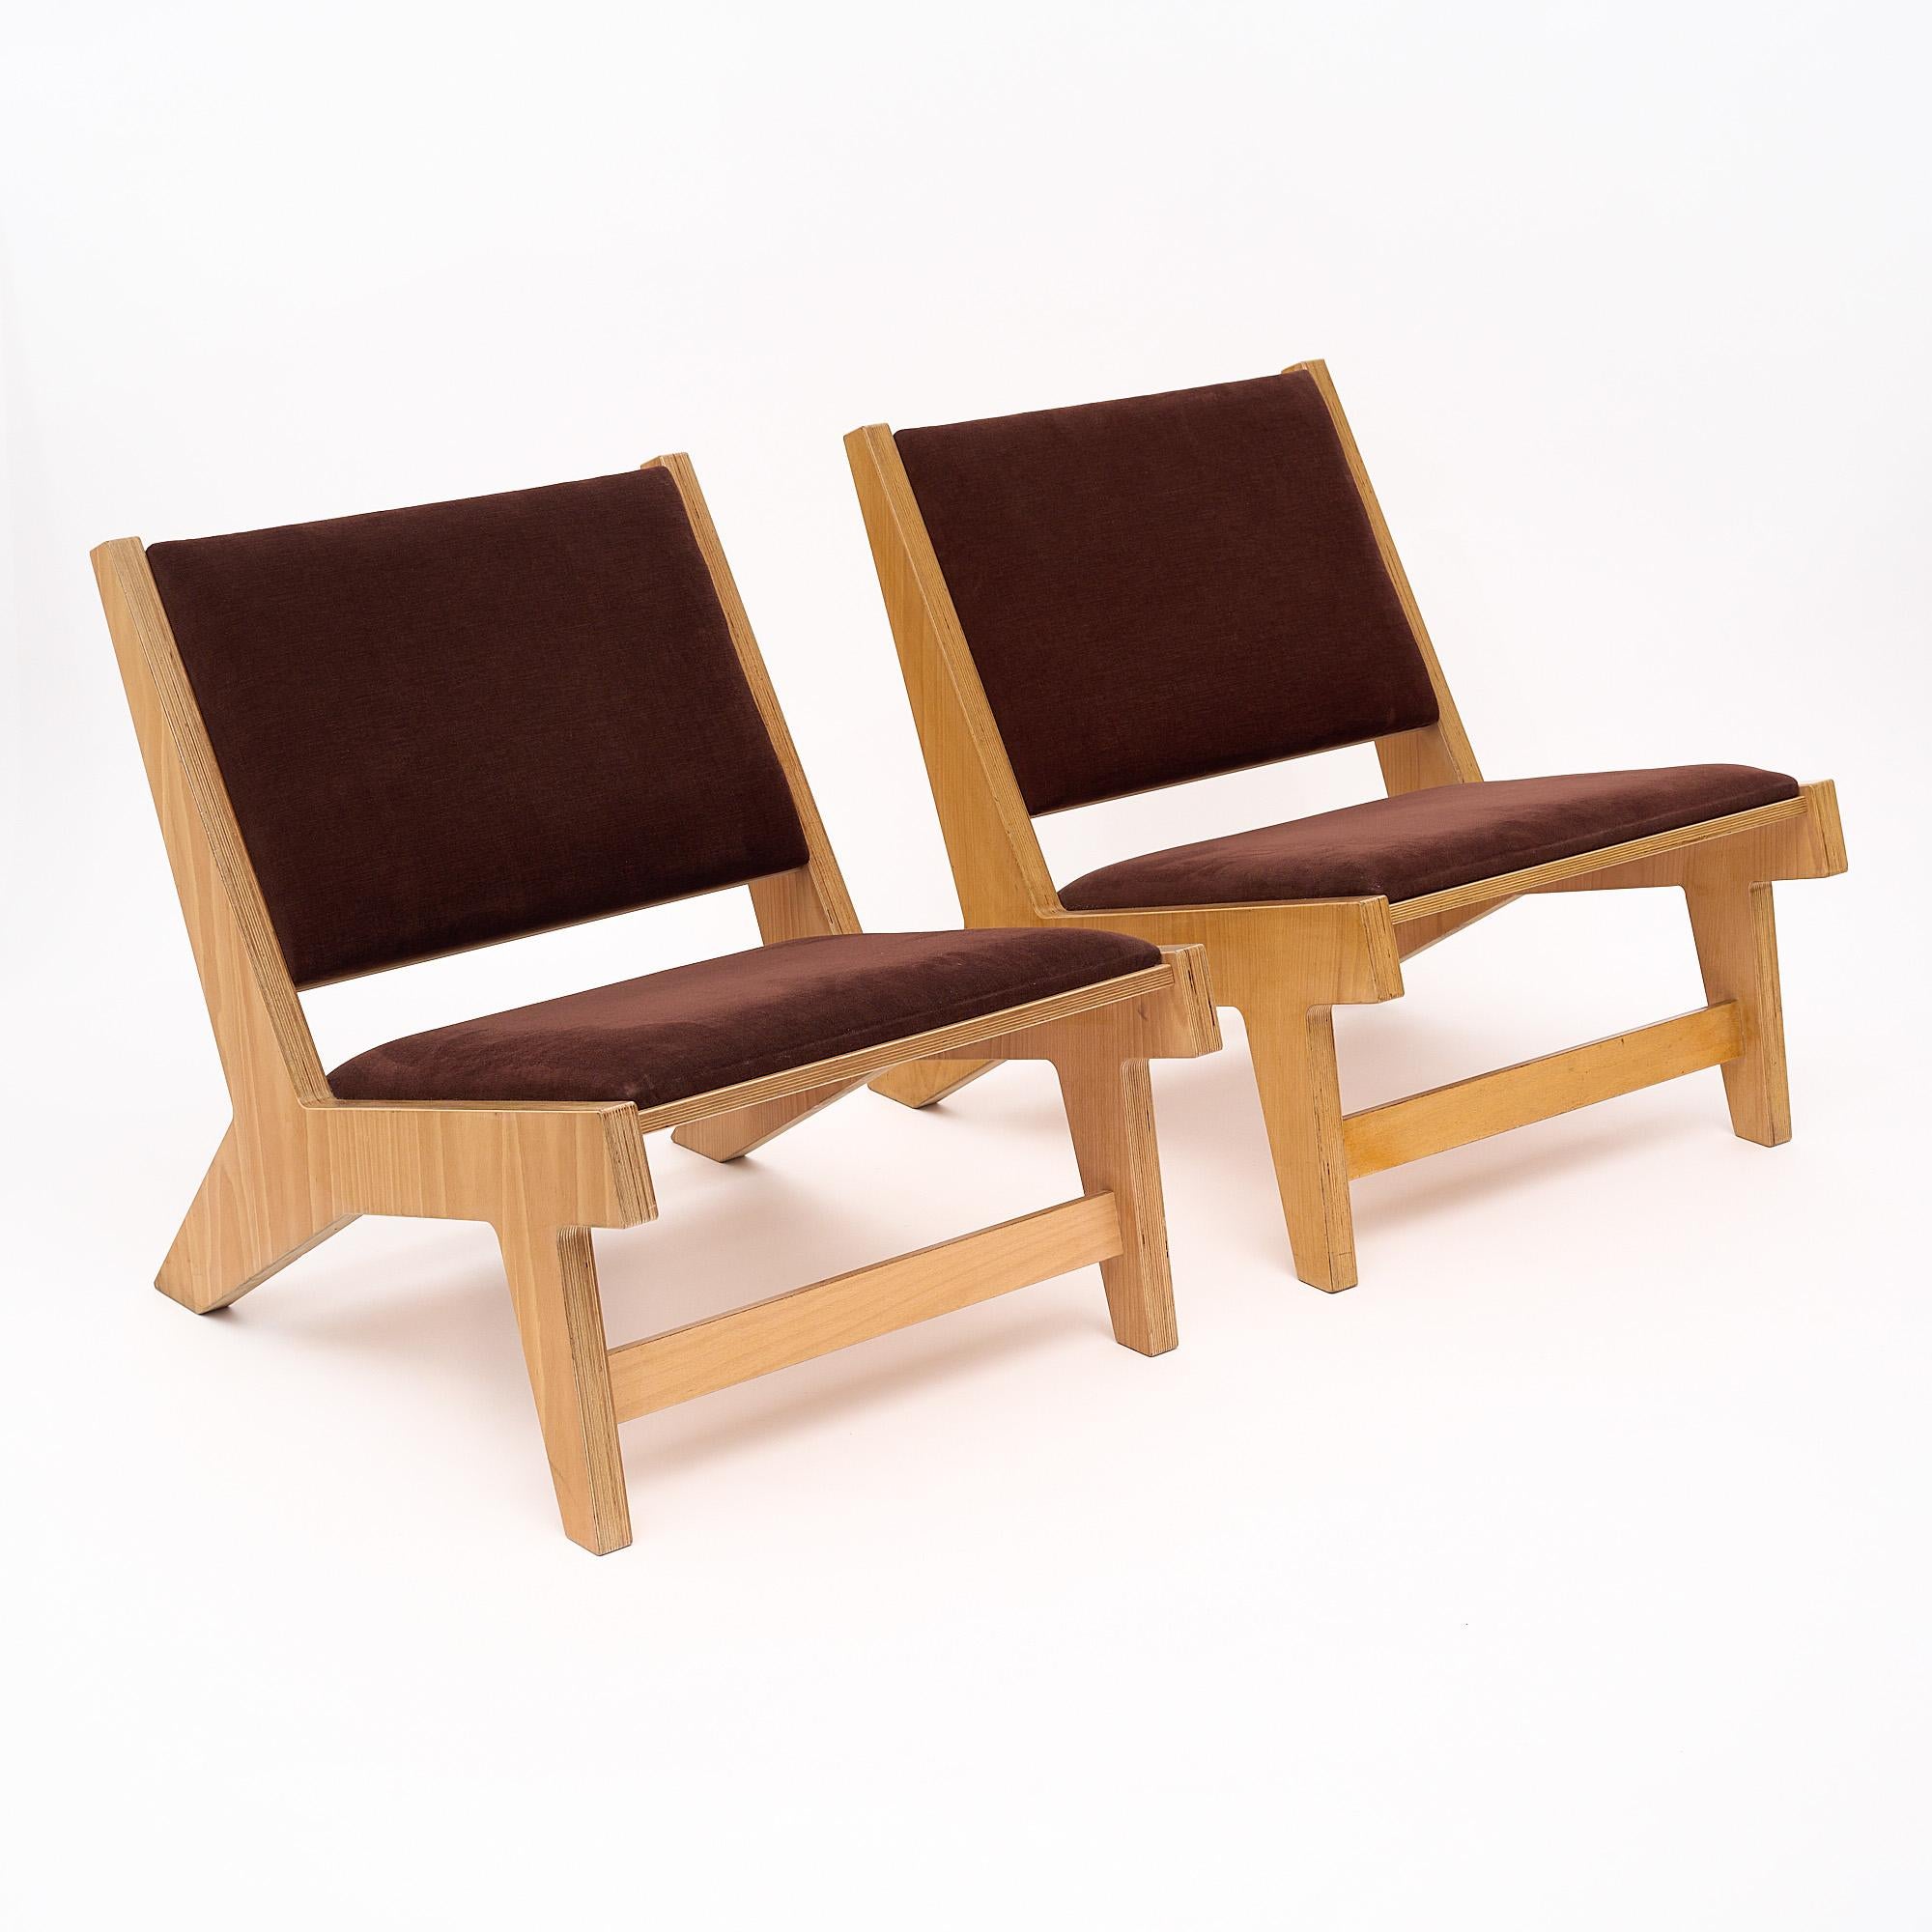 Pair of Armchairs, French, in the manner of Pierre Jeanneret, of cerused oak, upholstered in a brown velvet blend.